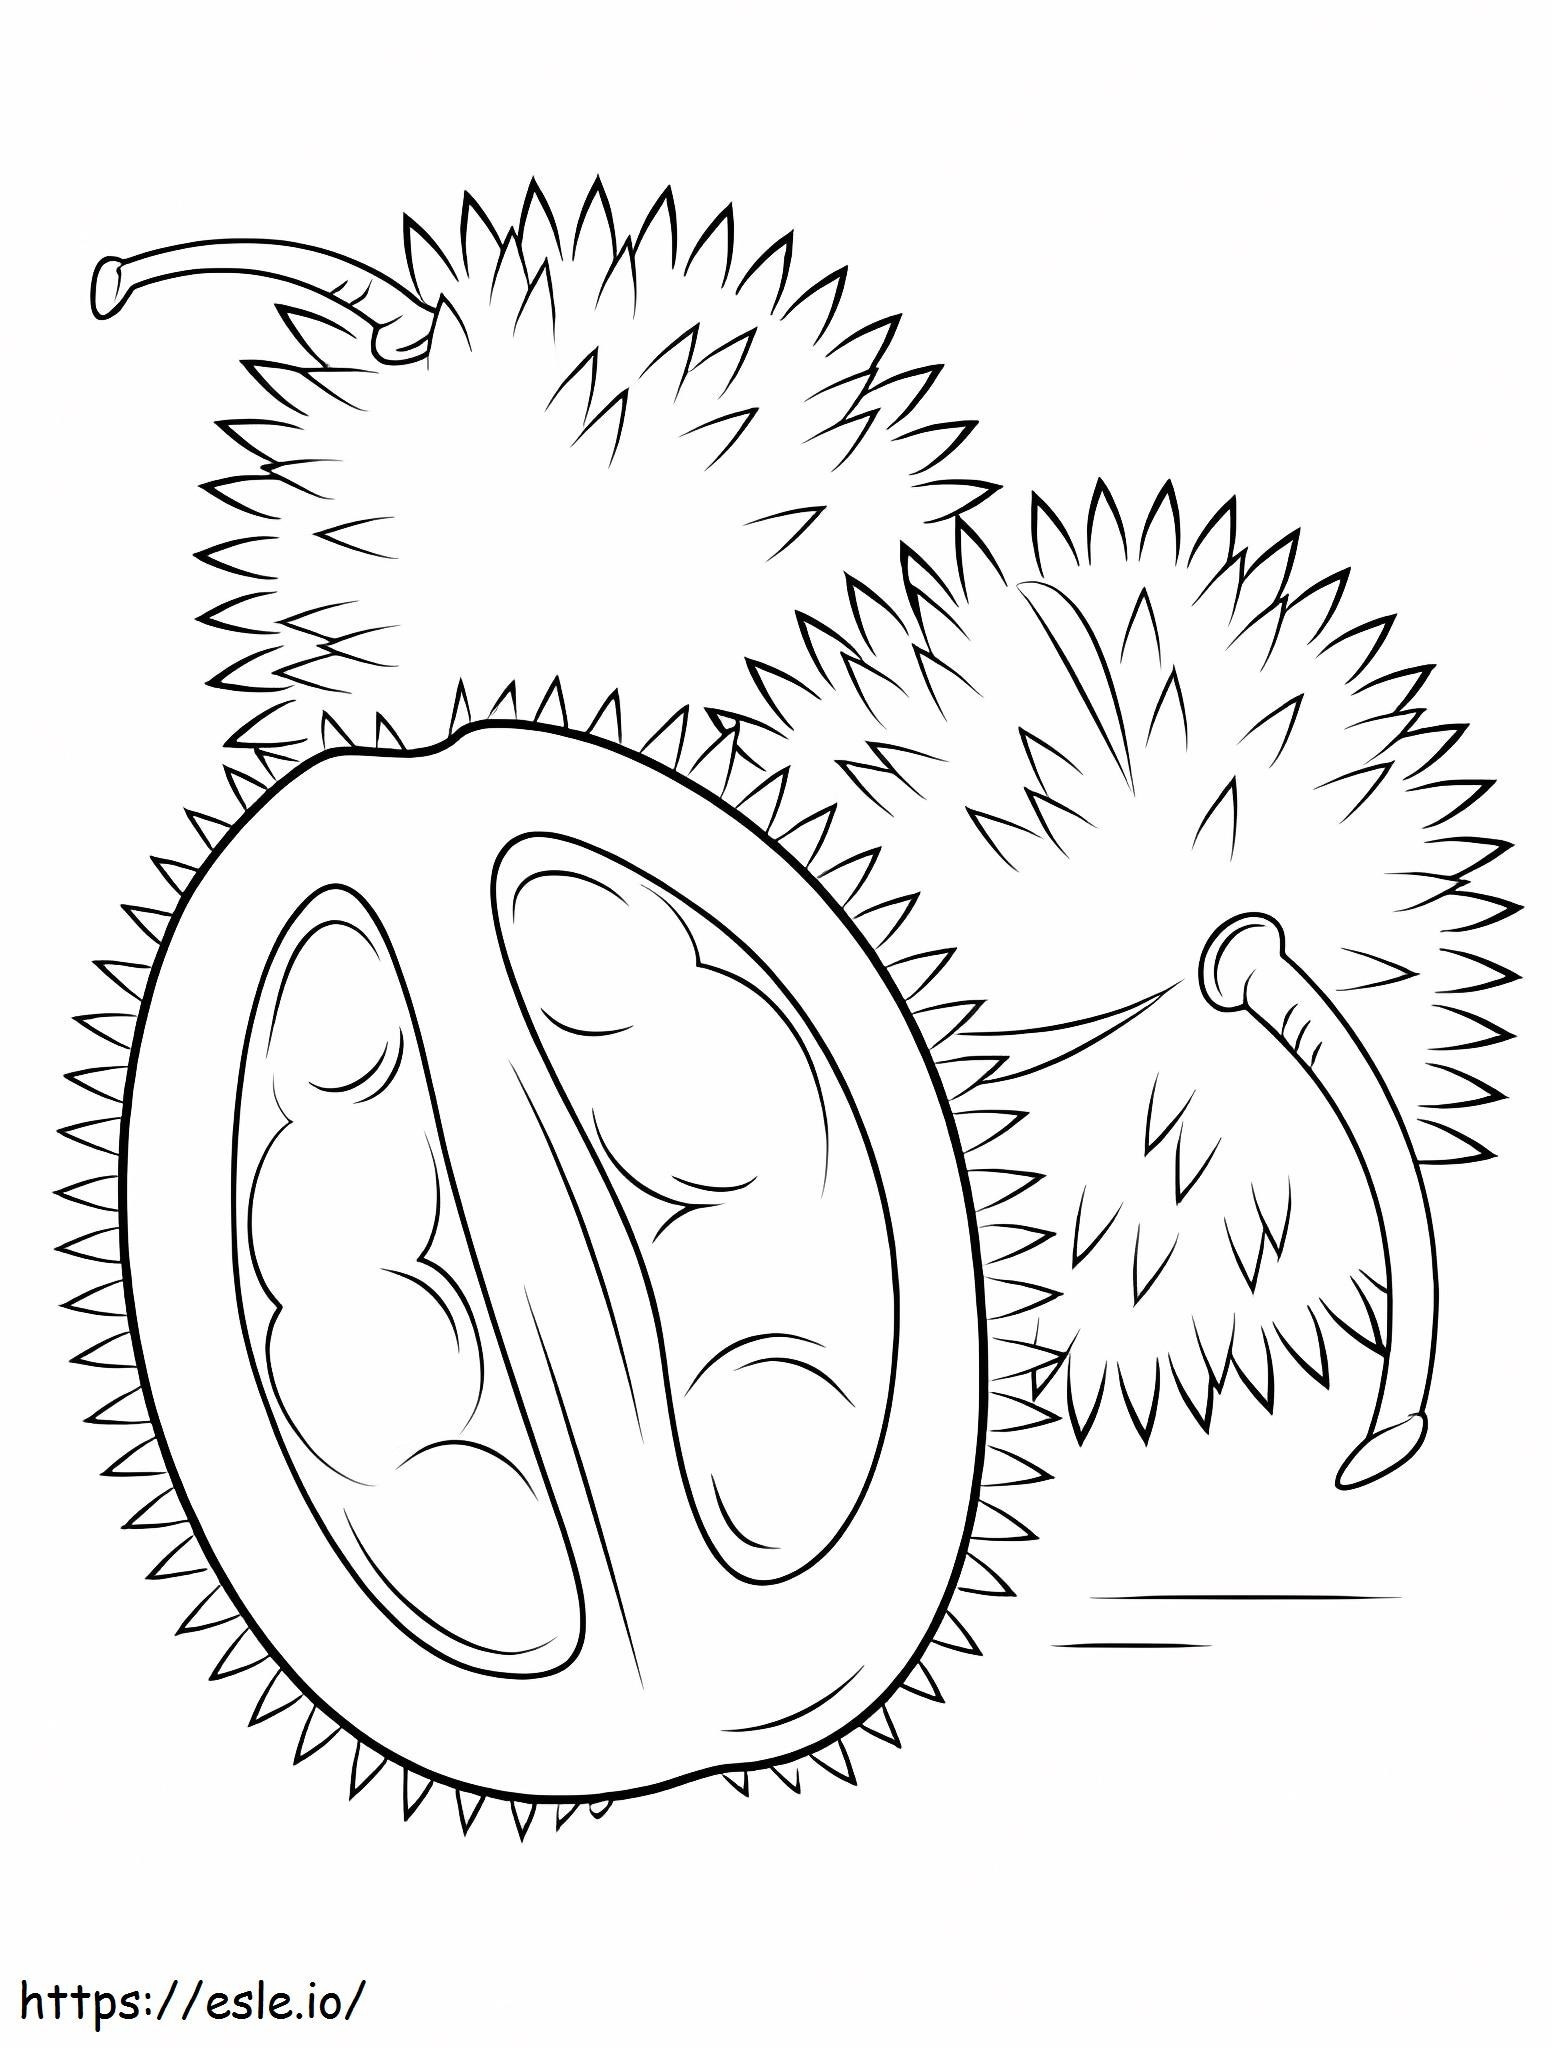 Great Durian coloring page